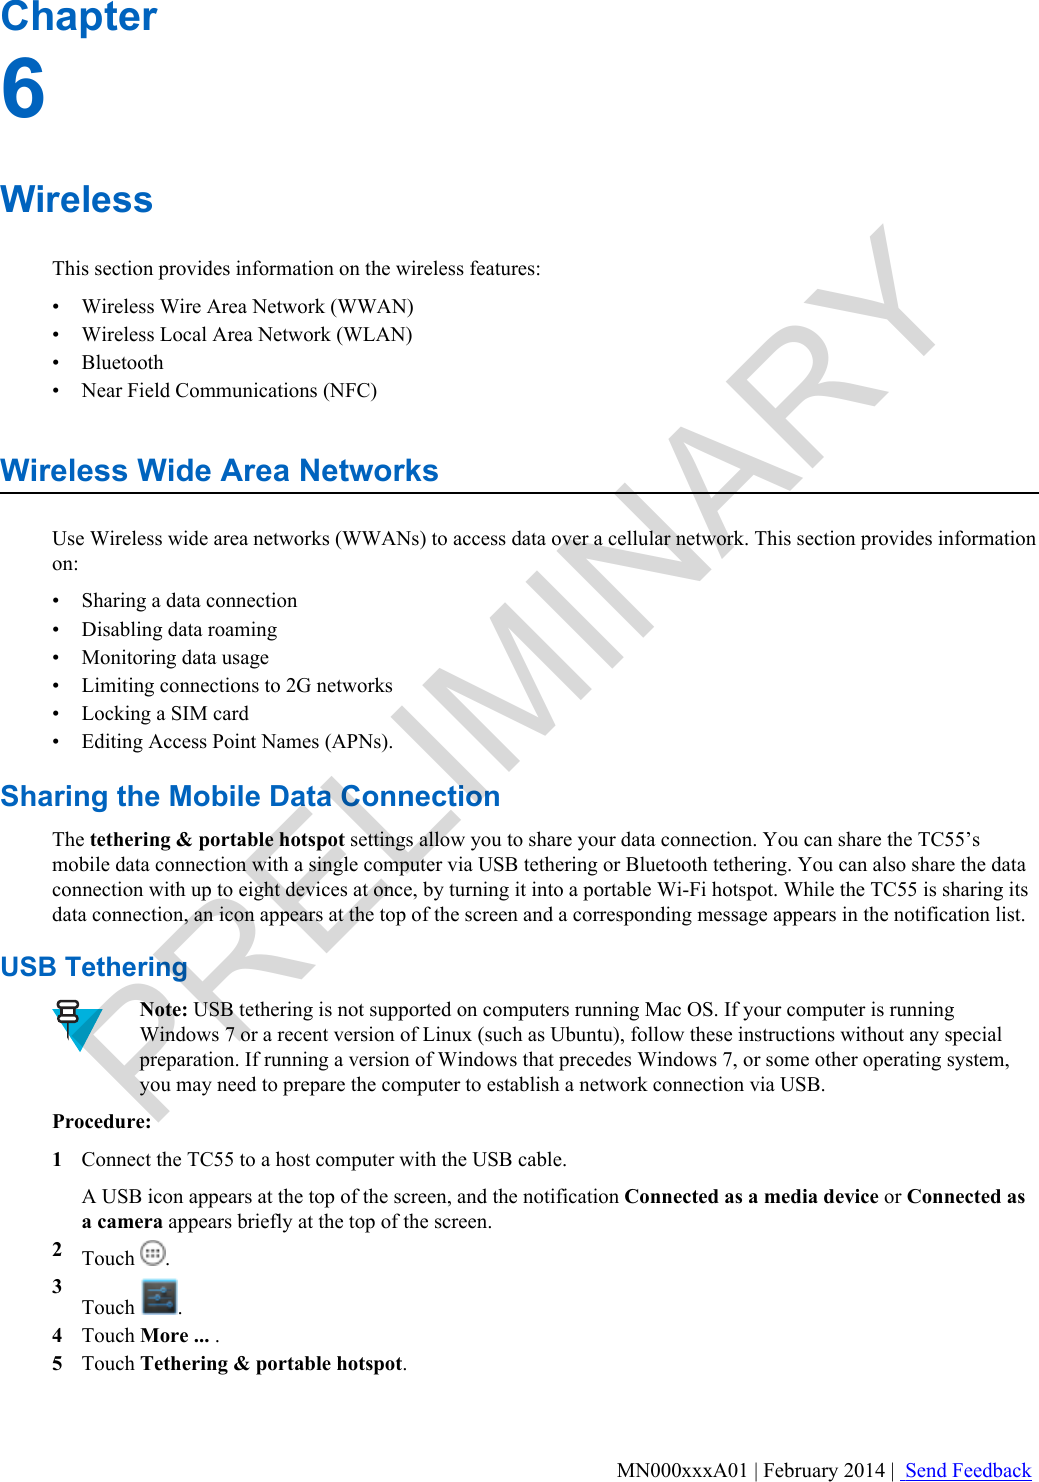 Chapter6WirelessThis section provides information on the wireless features:•Wireless Wire Area Network (WWAN)• Wireless Local Area Network (WLAN)• Bluetooth• Near Field Communications (NFC)Wireless Wide Area NetworksUse Wireless wide area networks (WWANs) to access data over a cellular network. This section provides informationon:•Sharing a data connection• Disabling data roaming• Monitoring data usage• Limiting connections to 2G networks• Locking a SIM card• Editing Access Point Names (APNs).Sharing the Mobile Data ConnectionThe tethering &amp; portable hotspot settings allow you to share your data connection. You can share the TC55’smobile data connection with a single computer via USB tethering or Bluetooth tethering. You can also share the dataconnection with up to eight devices at once, by turning it into a portable Wi-Fi hotspot. While the TC55 is sharing itsdata connection, an icon appears at the top of the screen and a corresponding message appears in the notification list.USB TetheringNote: USB tethering is not supported on computers running Mac OS. If your computer is runningWindows 7 or a recent version of Linux (such as Ubuntu), follow these instructions without any specialpreparation. If running a version of Windows that precedes Windows 7, or some other operating system,you may need to prepare the computer to establish a network connection via USB.Procedure:1Connect the TC55 to a host computer with the USB cable.A USB icon appears at the top of the screen, and the notification Connected as a media device or Connected asa camera appears briefly at the top of the screen.2Touch  .3Touch  .4Touch More ... .5Touch Tethering &amp; portable hotspot.MN000xxxA01 | February 2014 |  Send FeedbackPRELIMINARY